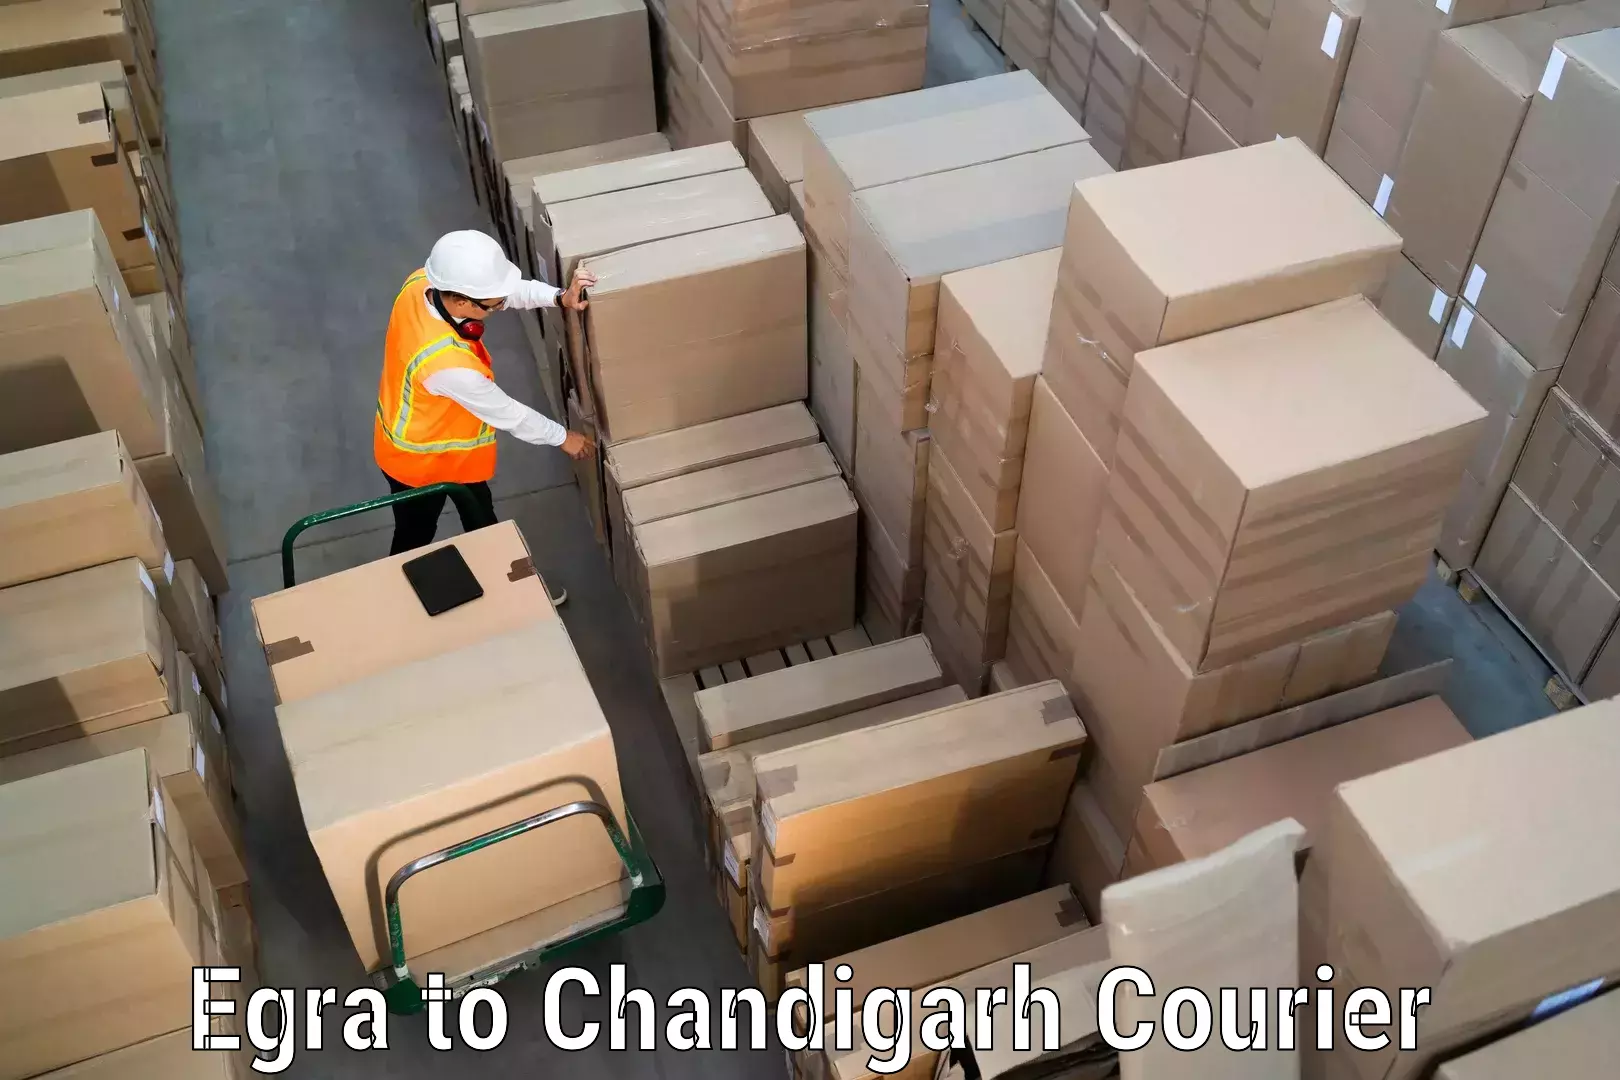 Easy access courier services Egra to Chandigarh